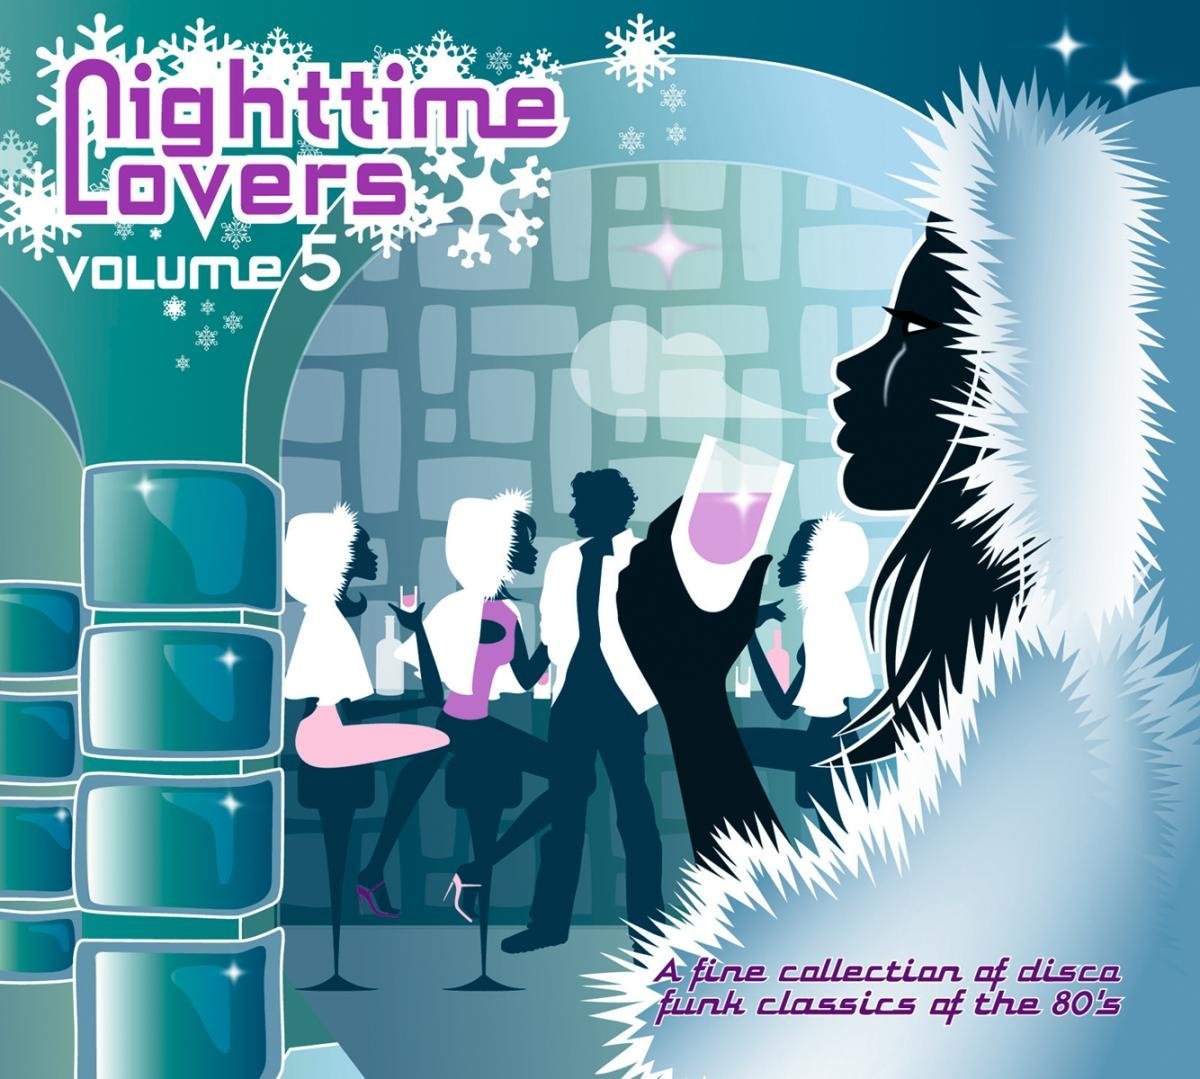 Nighttime lover. Back to Love Vol. 5.